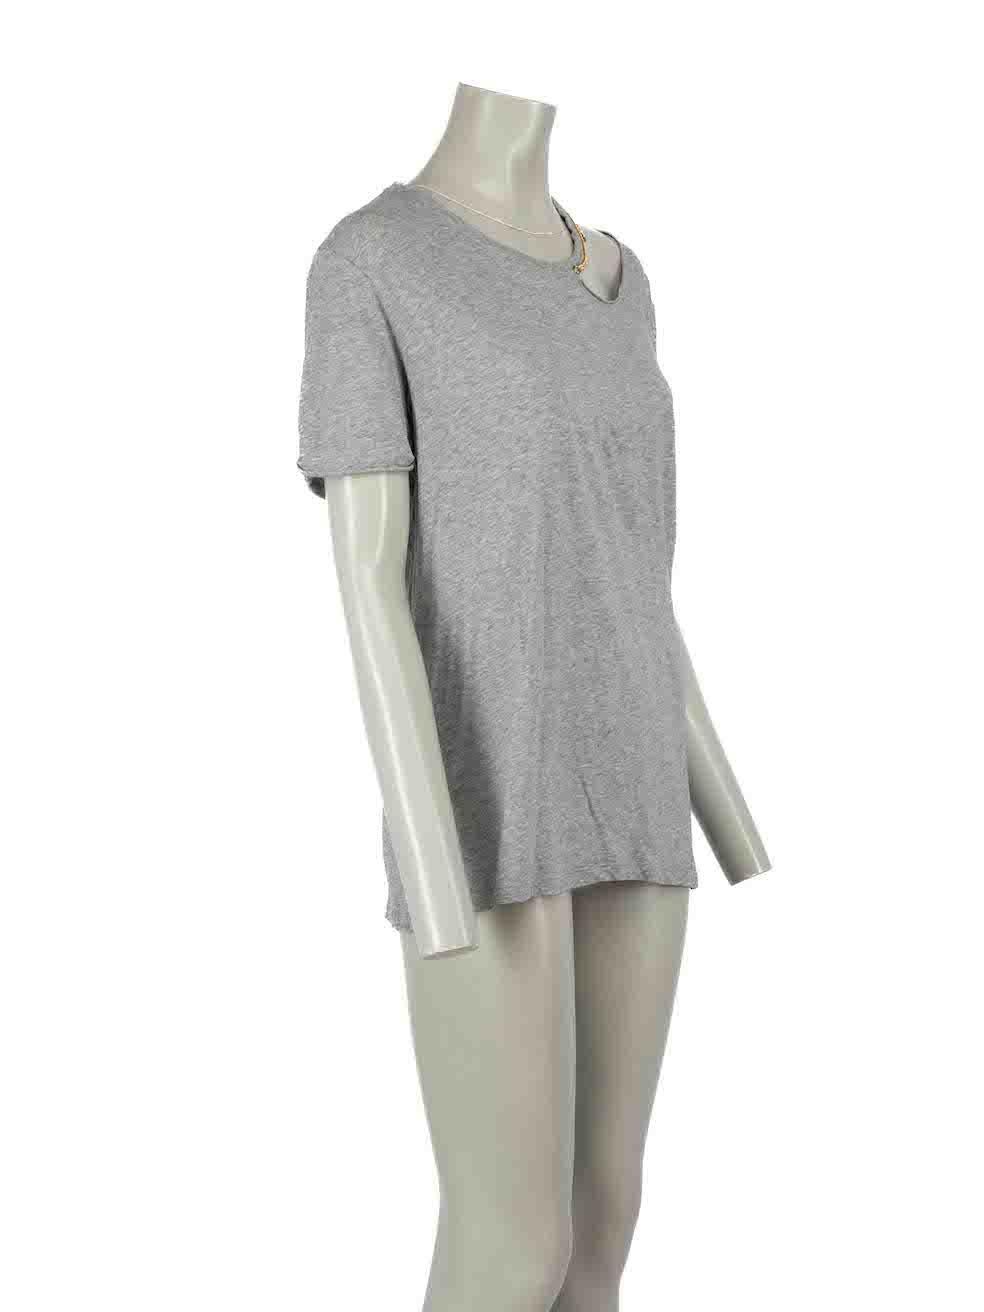 CONDITION is Good. Minor wear to top is evident. Light wear to fabric composition with a handful of very small holes found through the front on this used Stella McCartney designer resale item.
 
 Details
 Grey
 Cotton
 Short sleeve T- shirt
